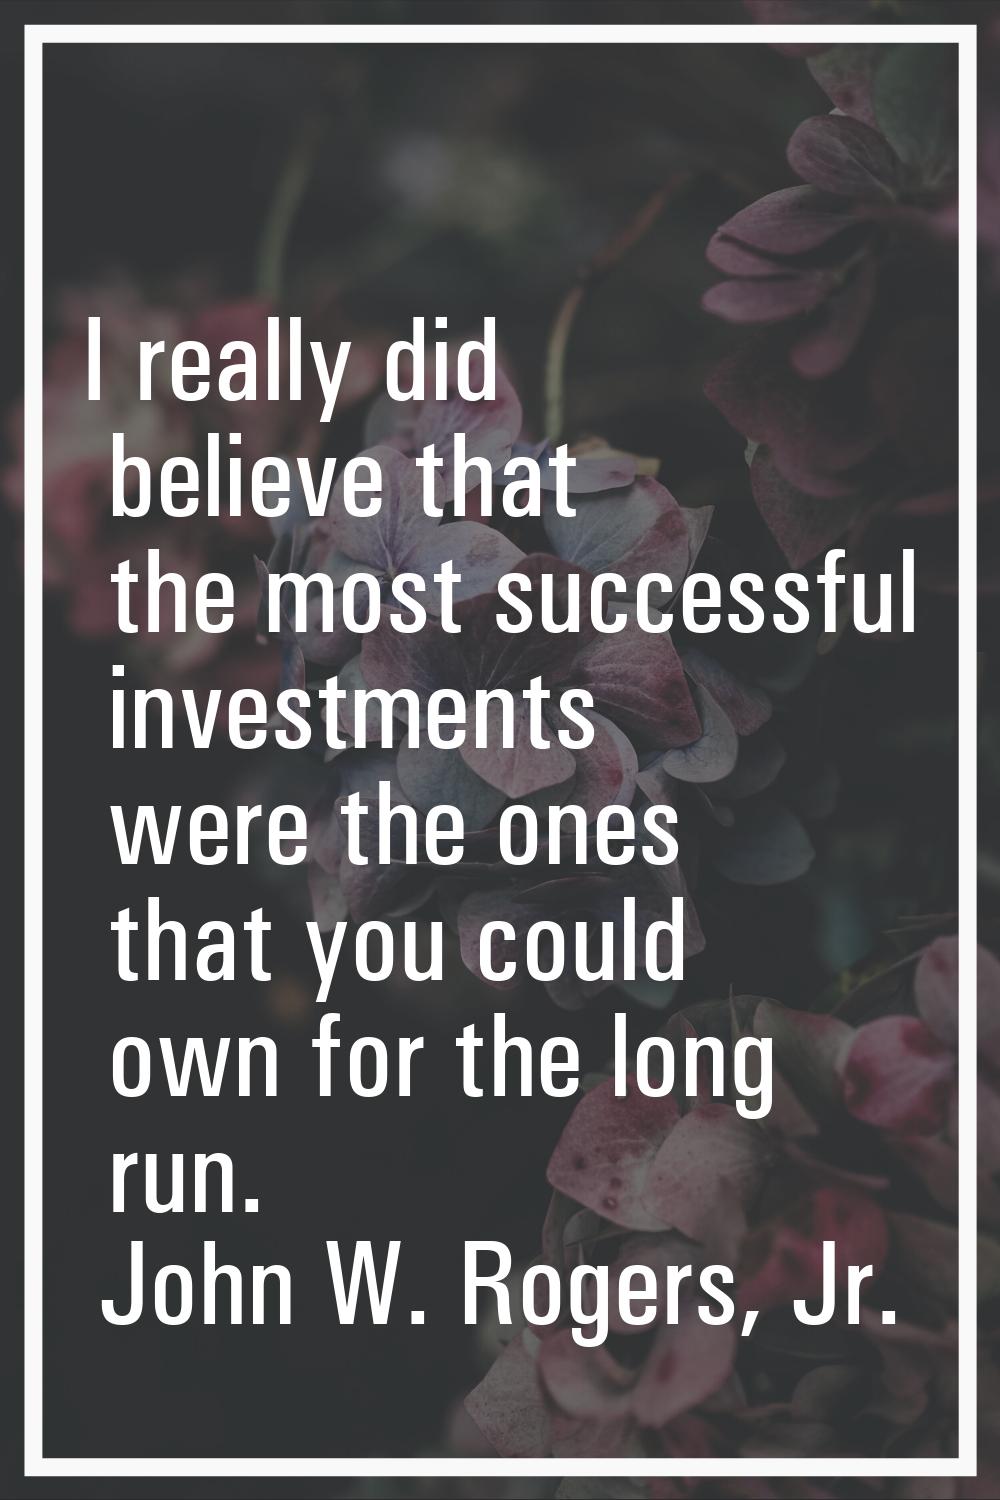 I really did believe that the most successful investments were the ones that you could own for the 